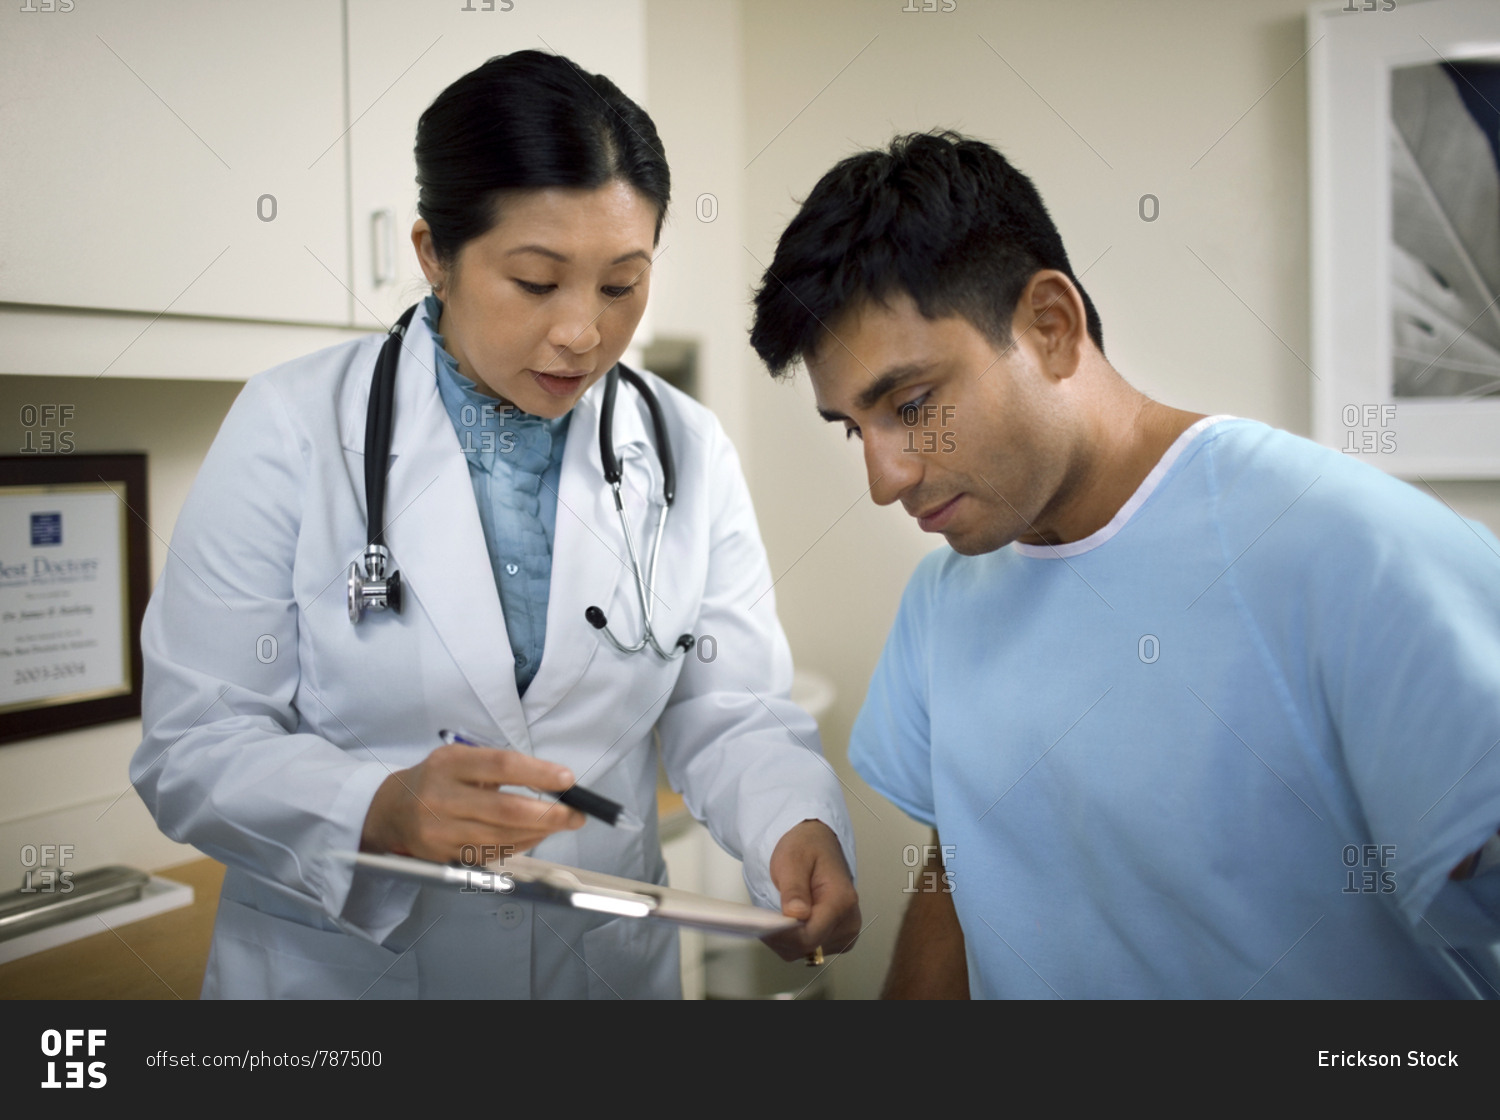 Female doctor consulting with a patient after a medical examination in her office.